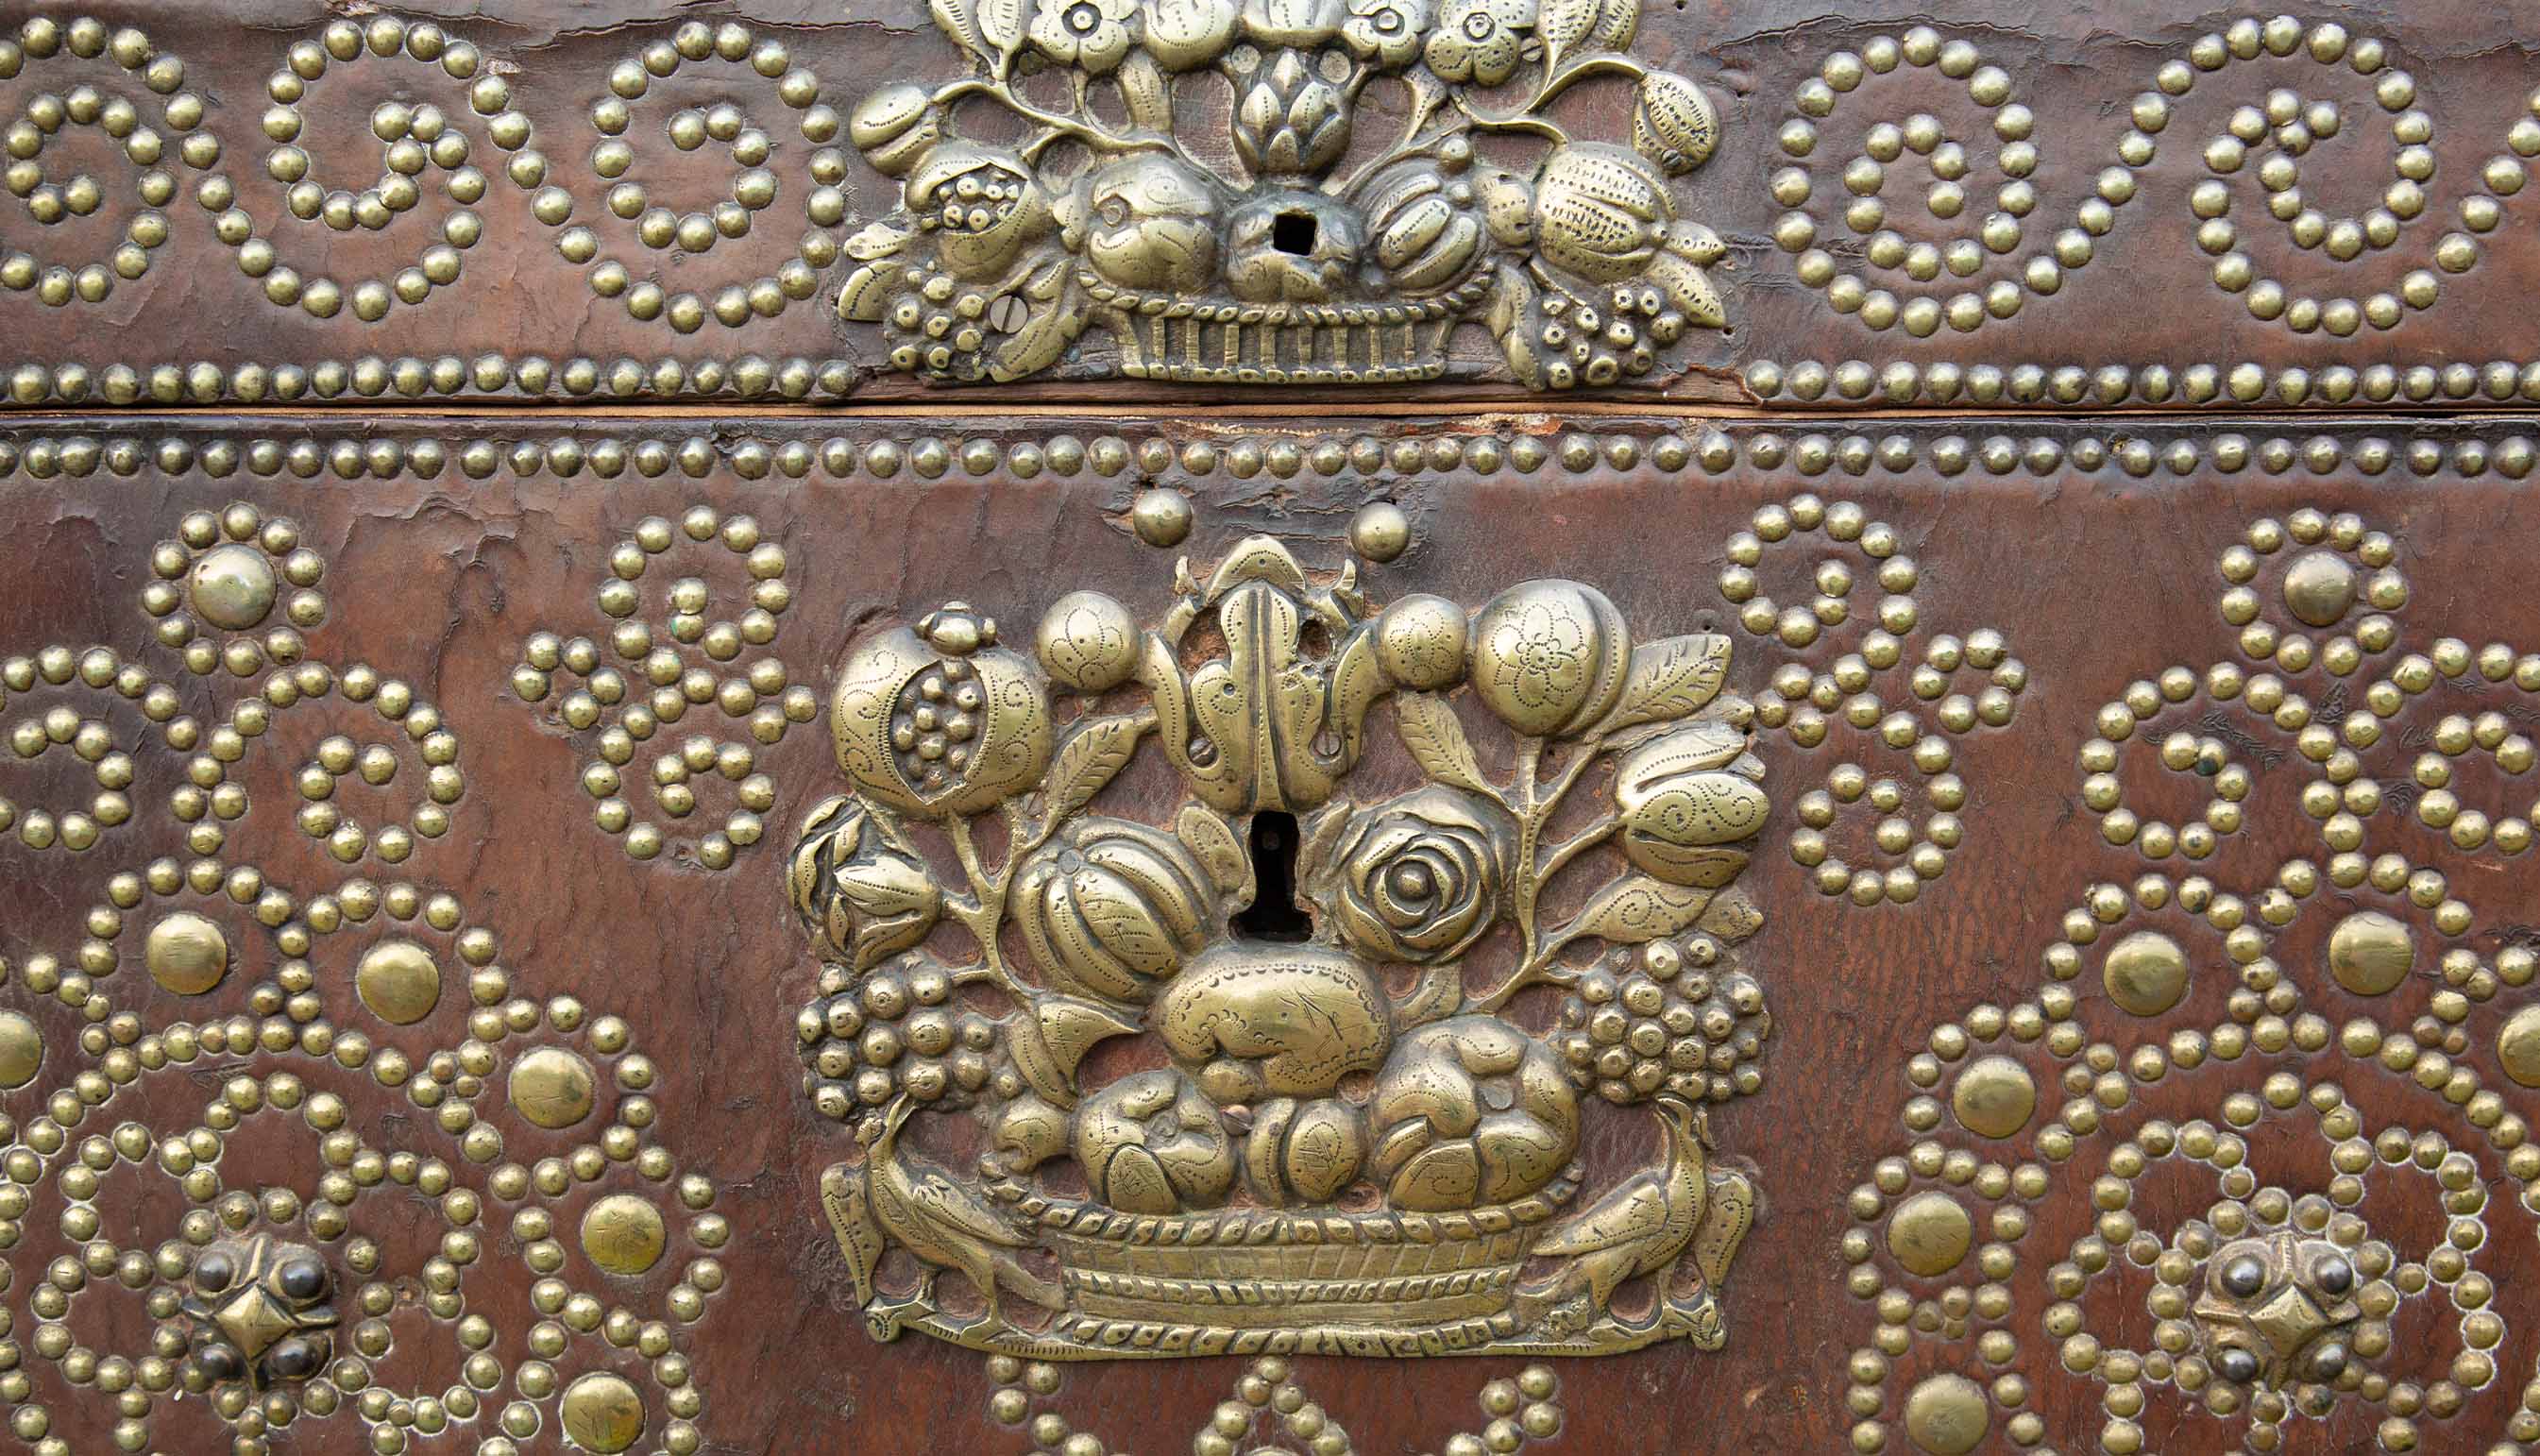 Brass Worked Leather and Wood Chest